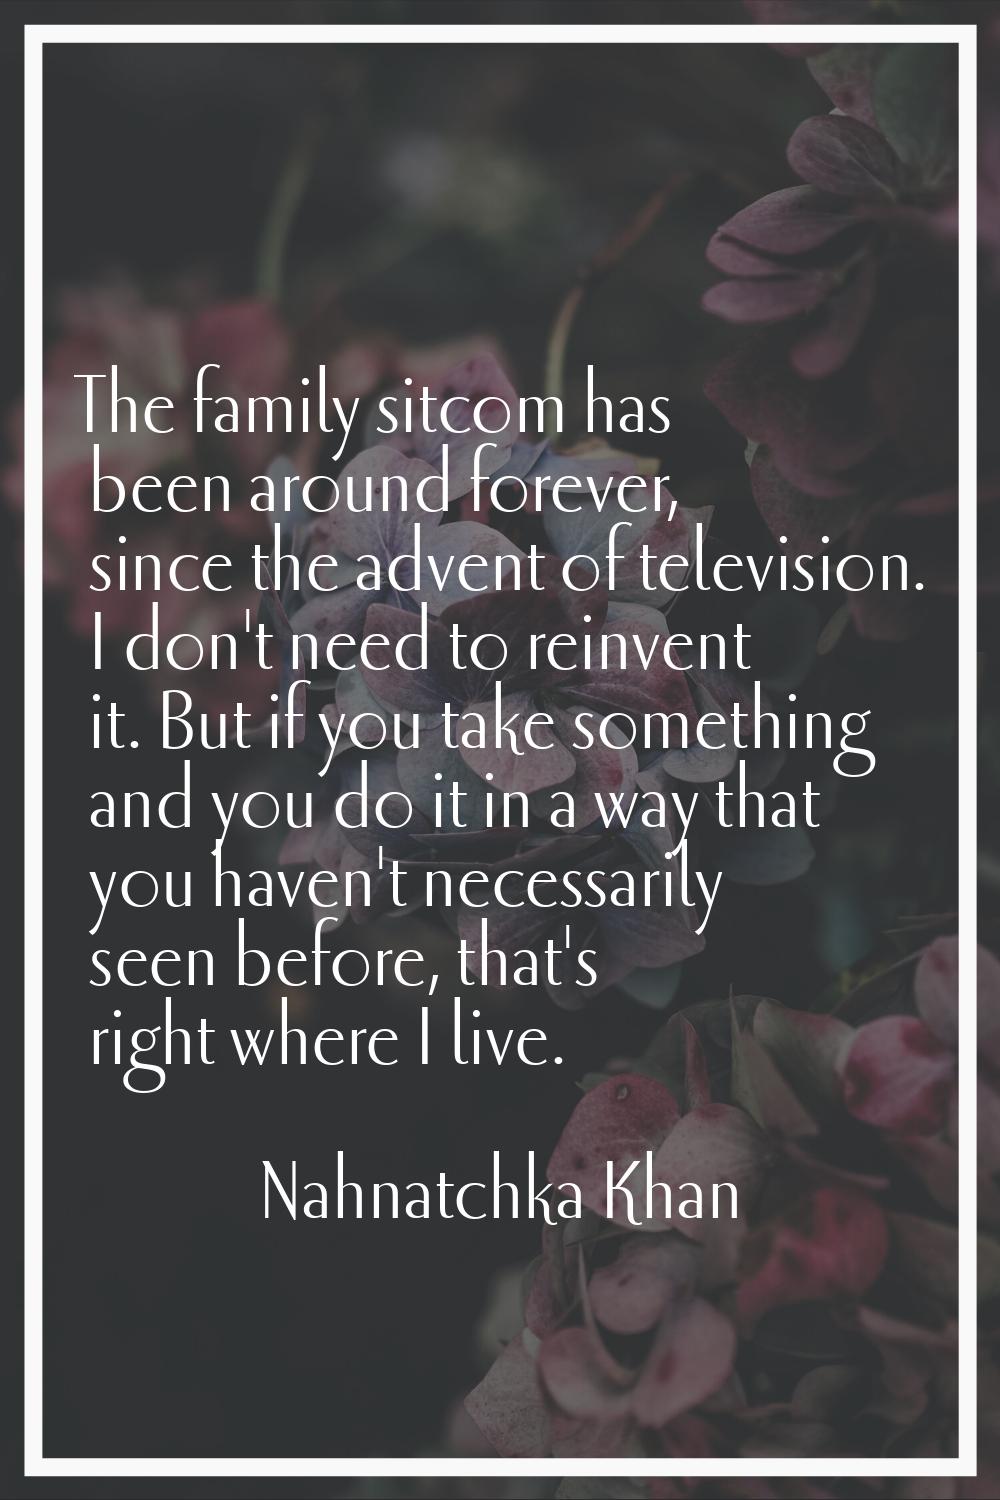 The family sitcom has been around forever, since the advent of television. I don't need to reinvent